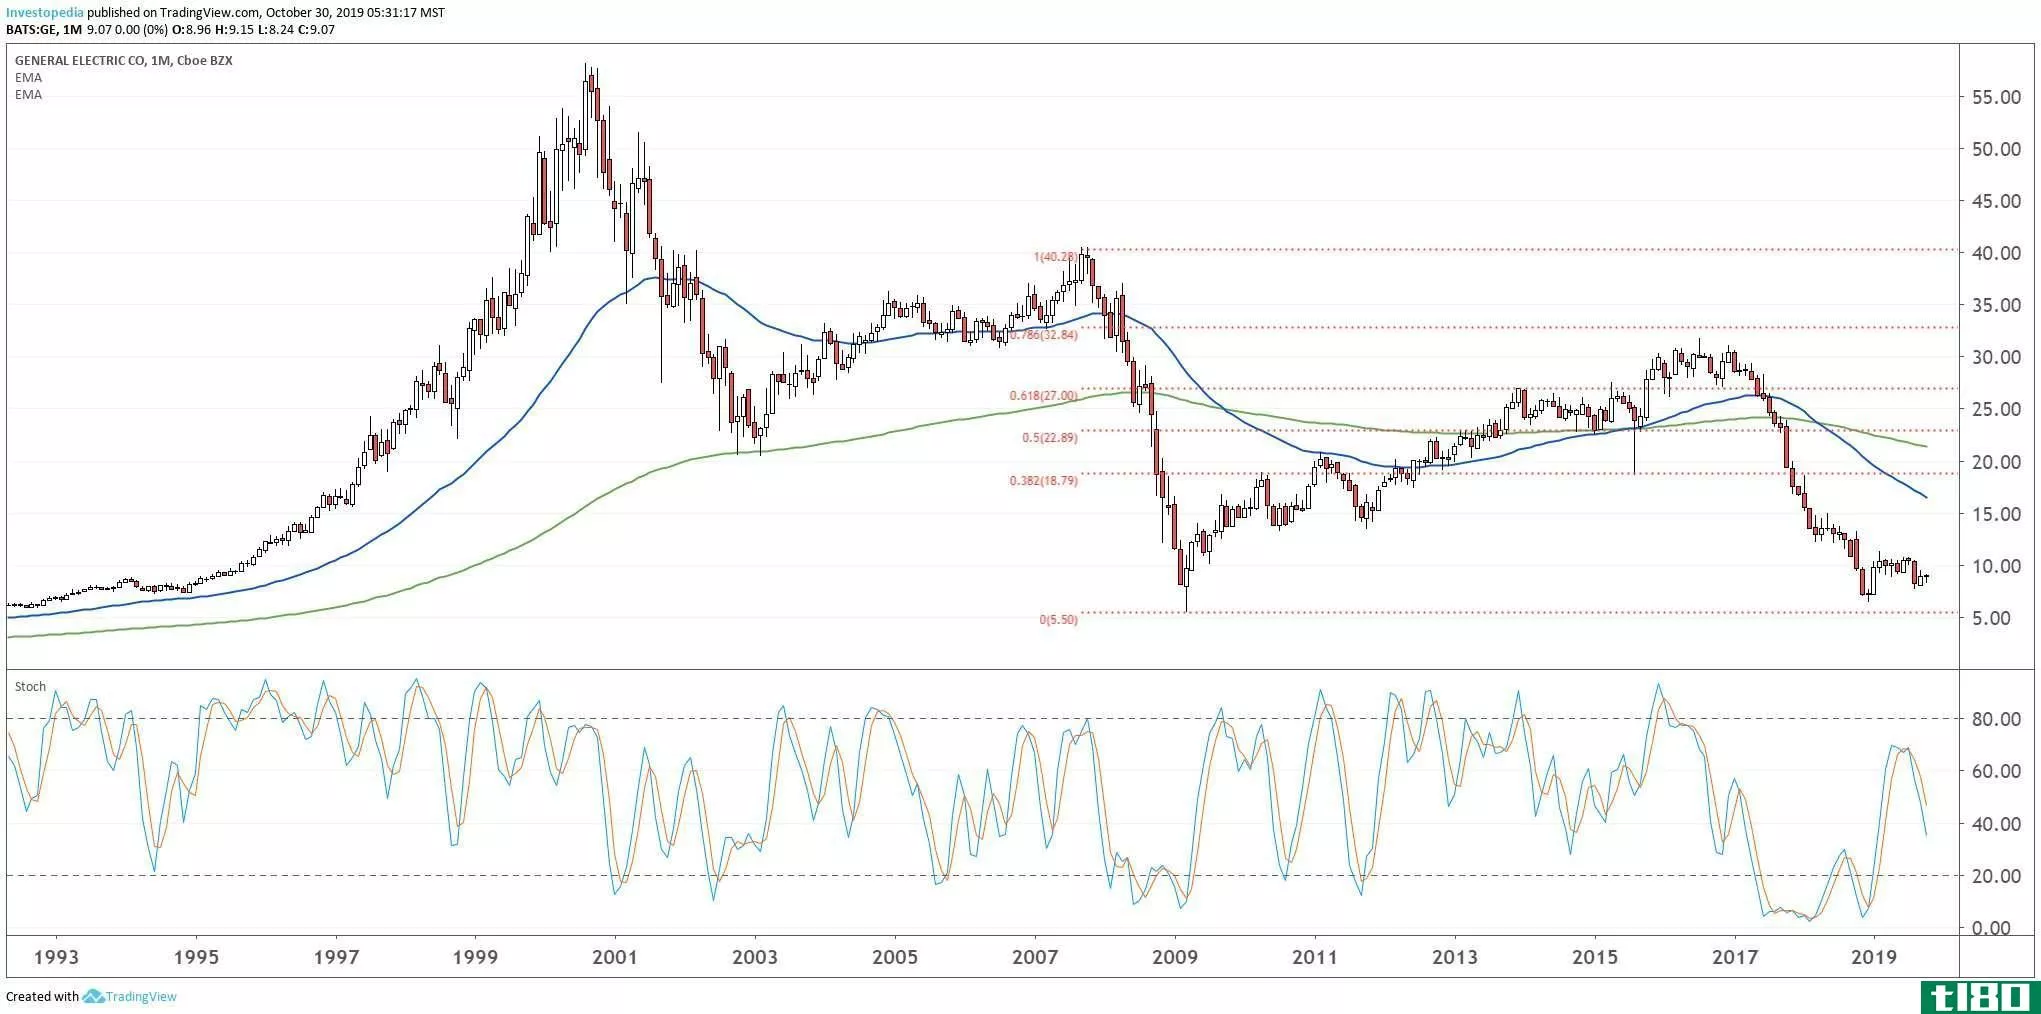 Long-term chart showing the share price performance of General Electric Company (GE)